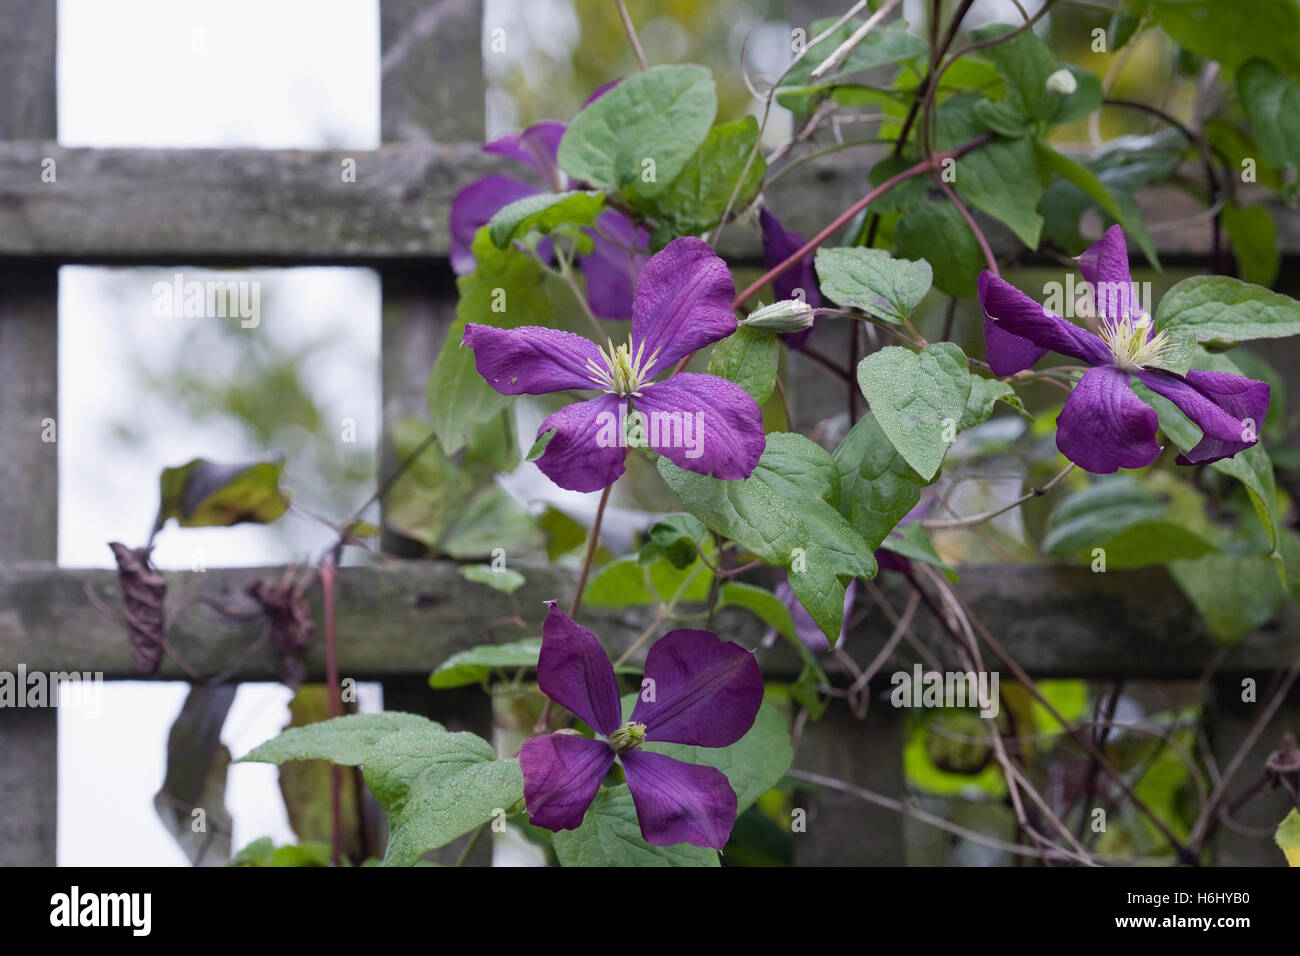 Purple Clematis flower growing over a trellis in an English garden. Stock Photo